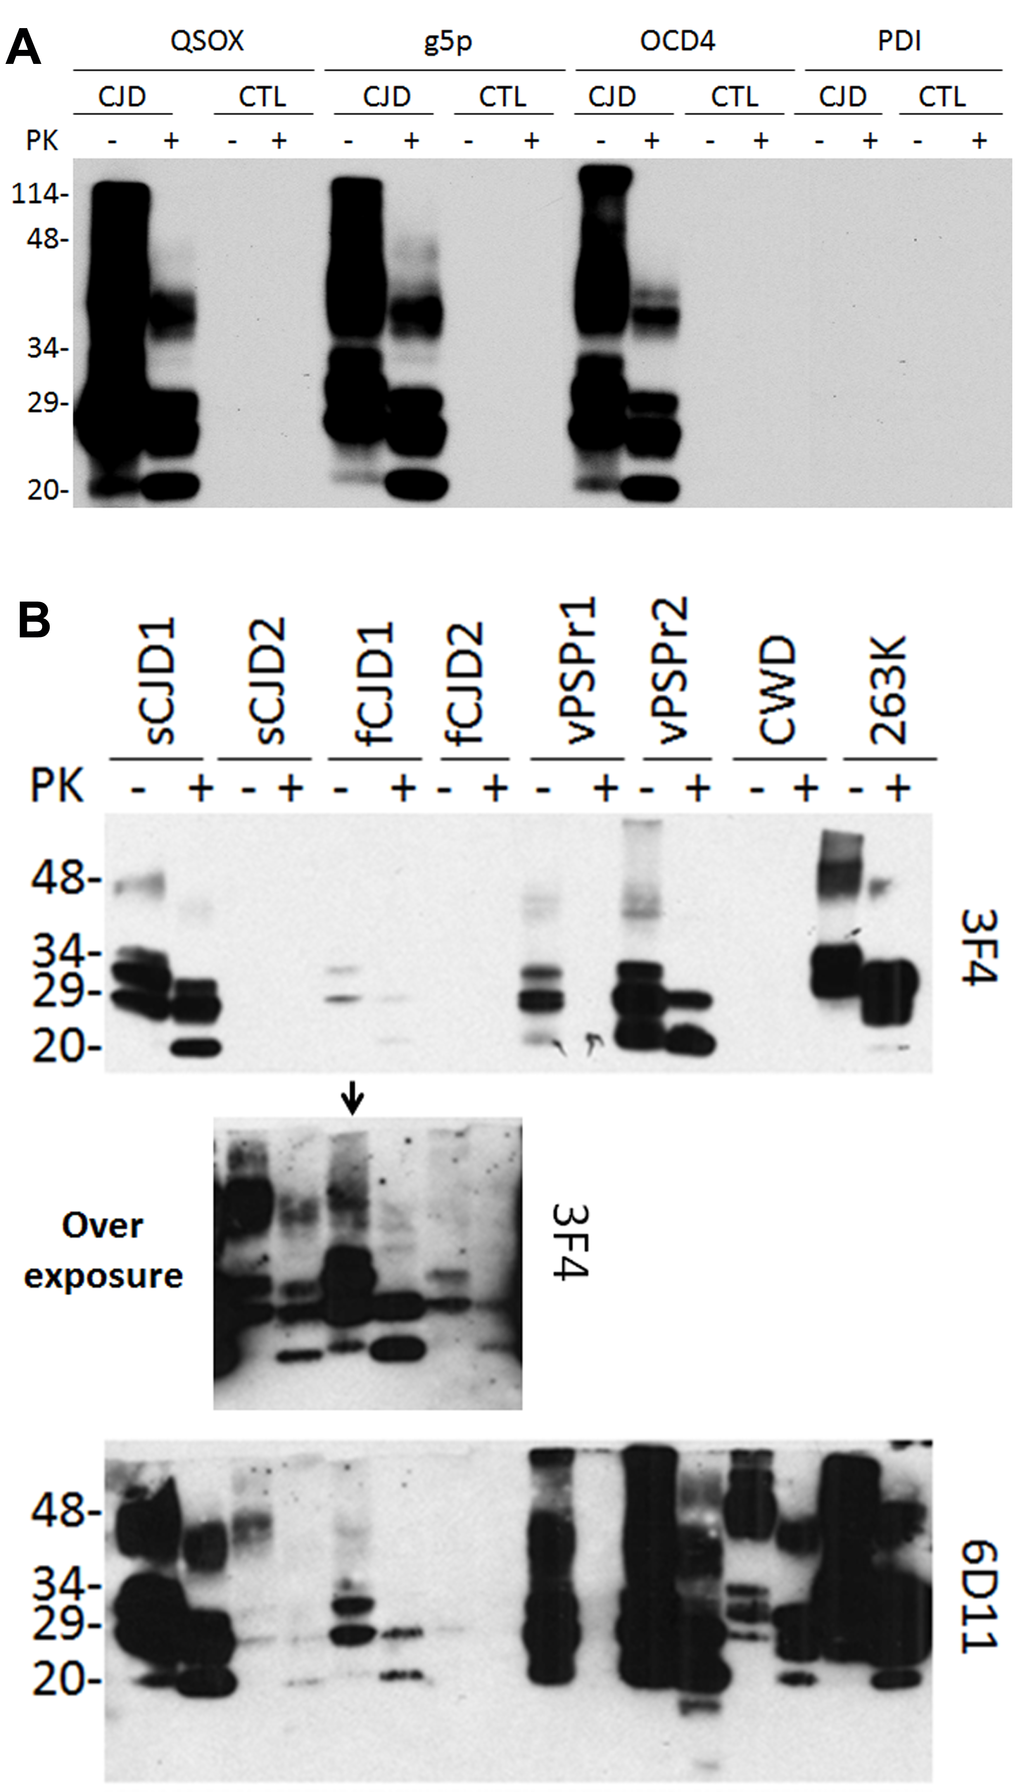 Western blotting of PrP captured by QSOX. (A) PrP eluted from the QSOX-conjugated beads was detected by Western blotting with the anti-PrP antibody 3F4. The g5p-beads and OCD4-beads were used as controls while the PDI beads served as a negative control. Like g5p and OCD4, QSOX captures PrP only from CJD but not from non-CJD control brain homogenate. (B) PrP was captured by the QSOX beads from brain homogenates of two sCJD cases (sCJD1 and sCJD2), two cases with different genetic prion diseases (fCJD1 and fCJD2), two cases with VPSPr (Variably protease-sensitive prionopathy) (VPSPr1 and VPSPr2), CWD and hamster 263K. PrPSc captured from sCJD2 and fCJD2 was detectable by 3F4 only on the overexposed film (middle panel shows the overexposed part of the above blot containing samples from sCJD2, fCJD1 and fCJD2). The blots were probed with the 3F4 and 6D11 antibodies and they are a representative of three experiments.